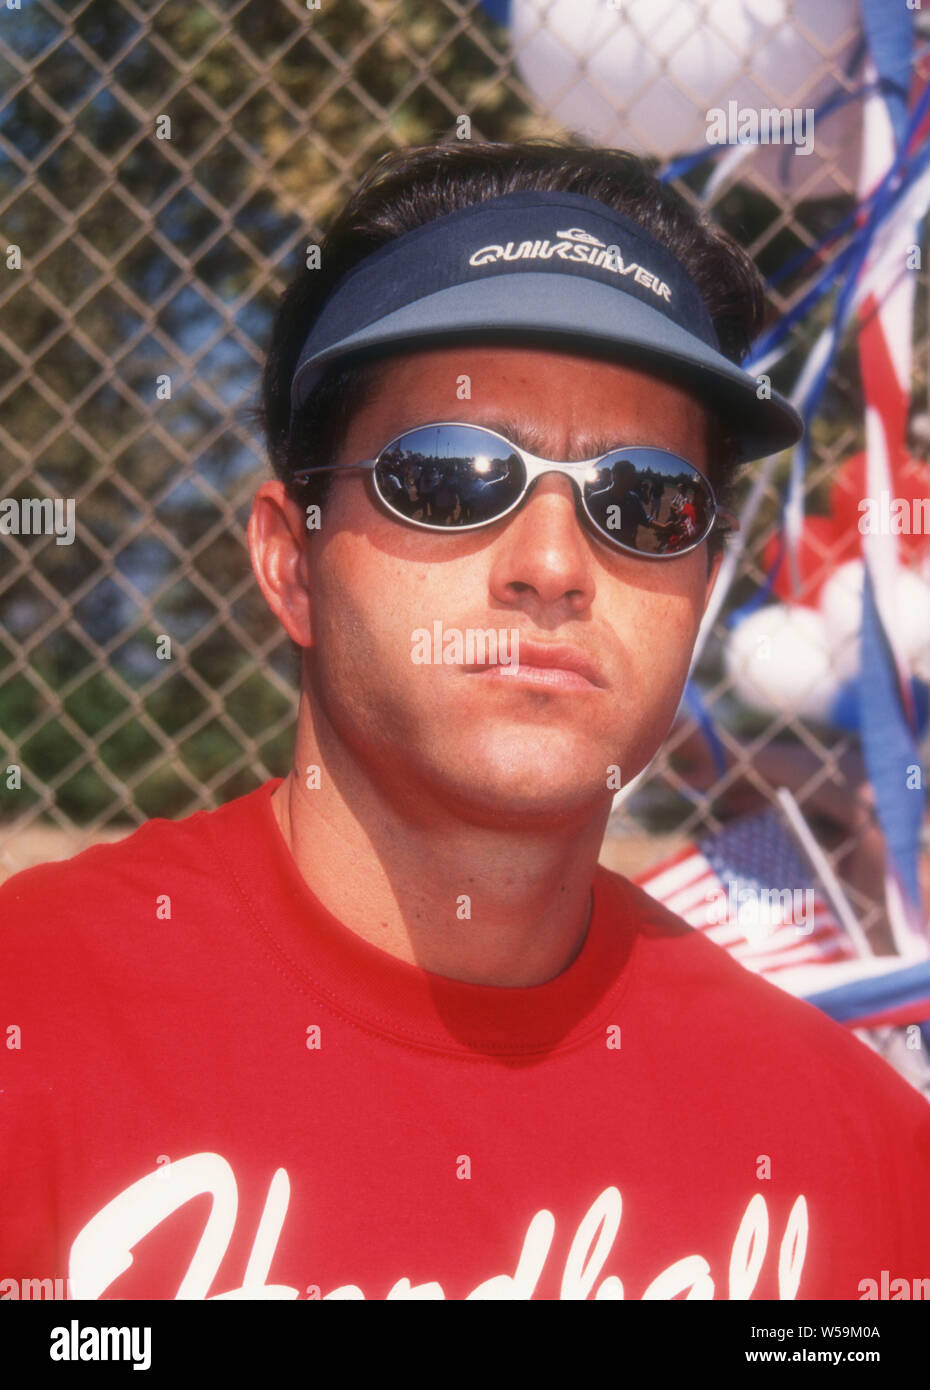 Eric Karros, Los Angeles Dodgers, Signed 8x10 Photograph